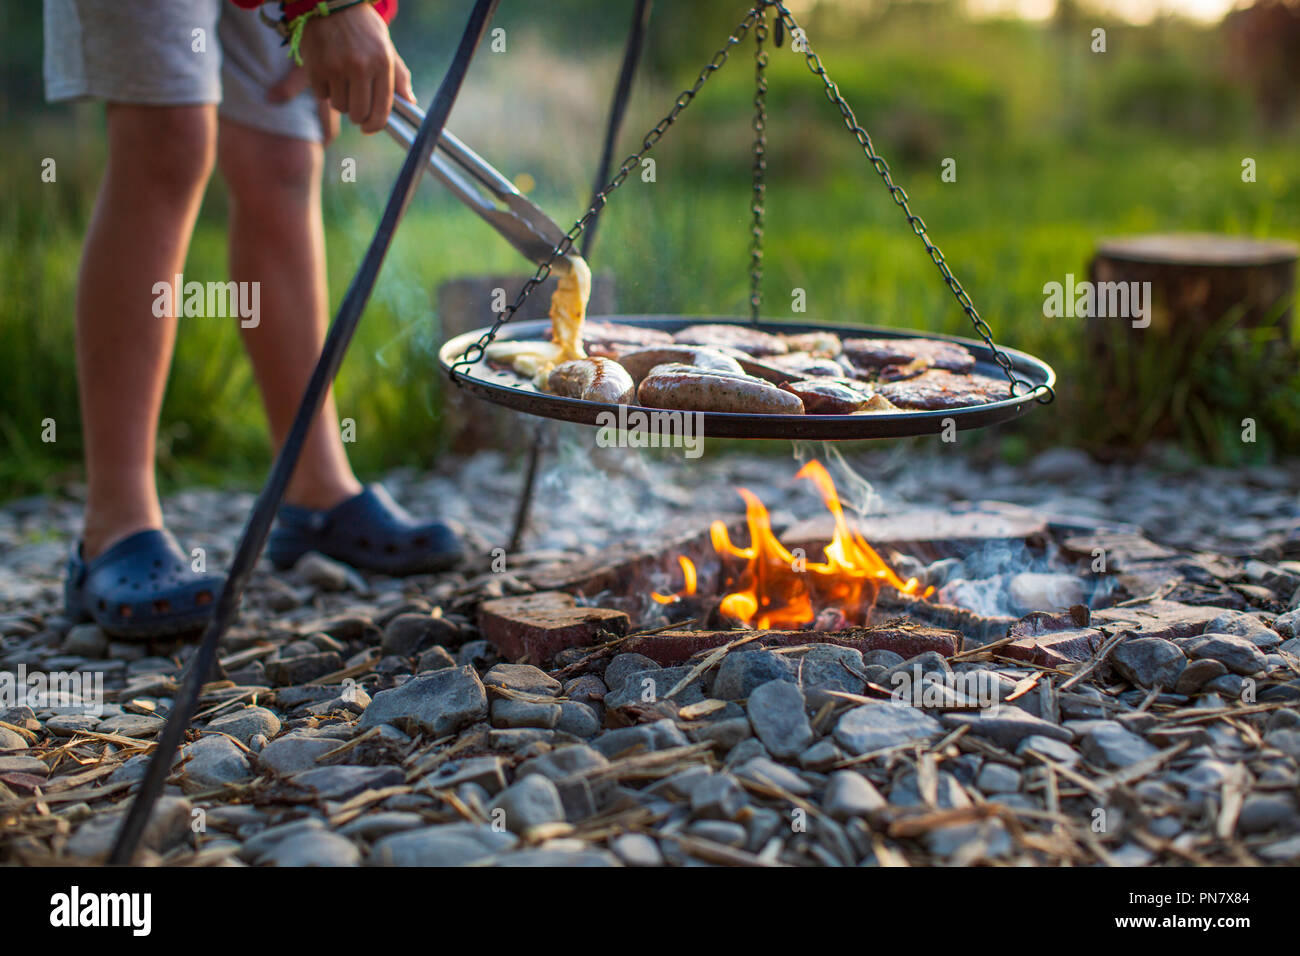 A young boy cooking on an open camp fire. Stock Photo